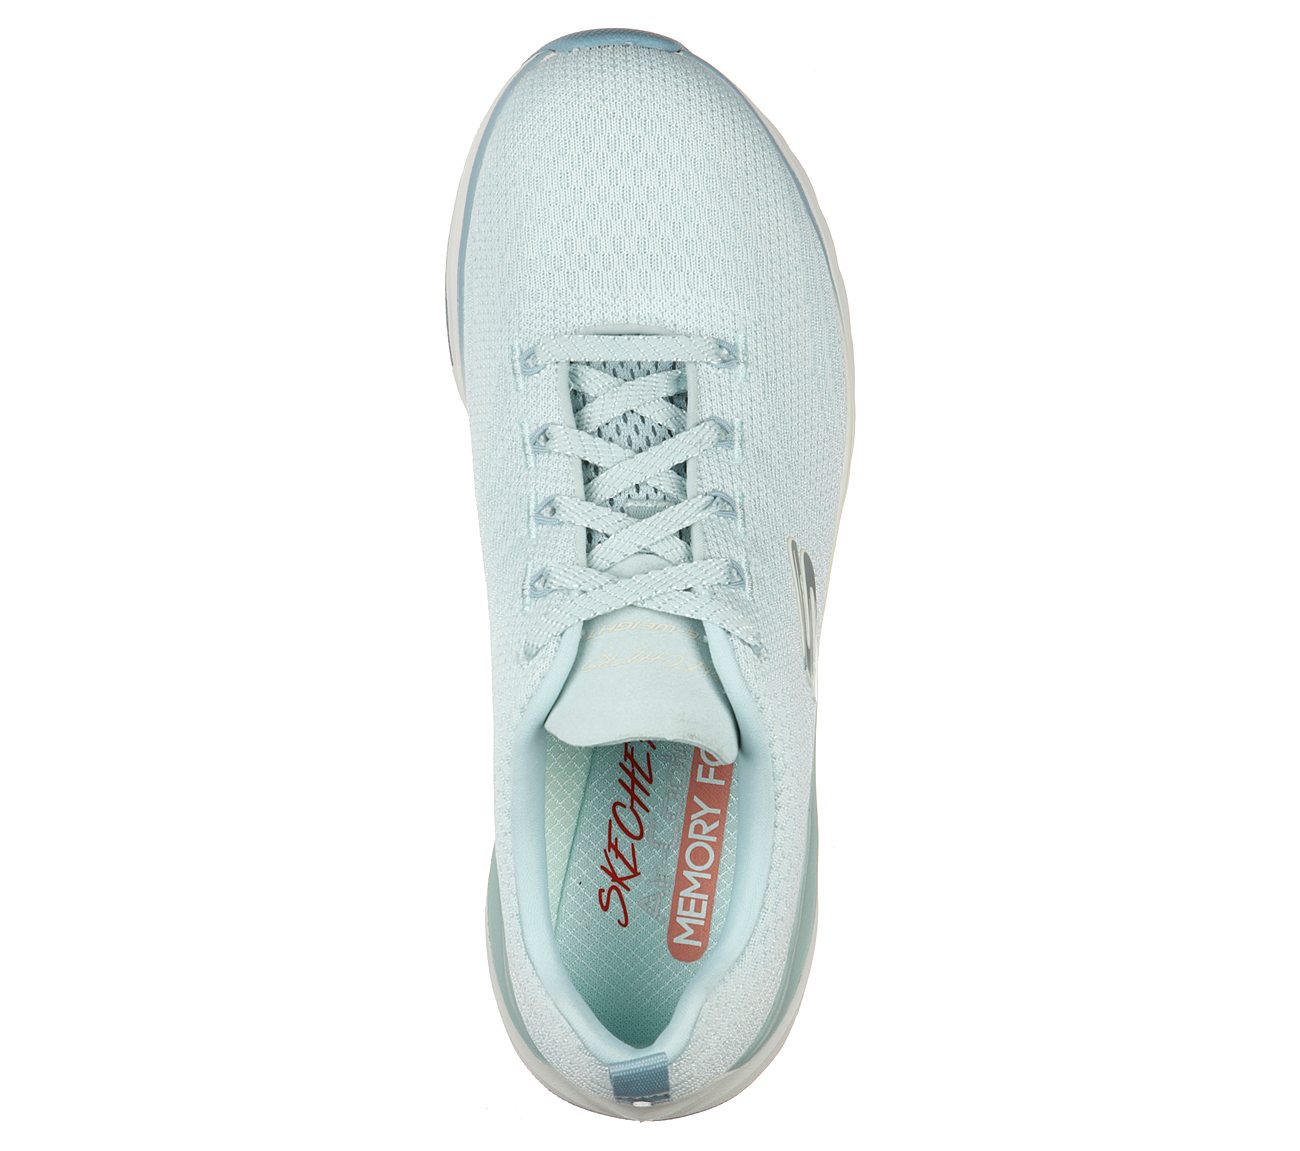 ULTRA GROOVE - PURE VISION, LLIGHT BLUE Footwear Top View